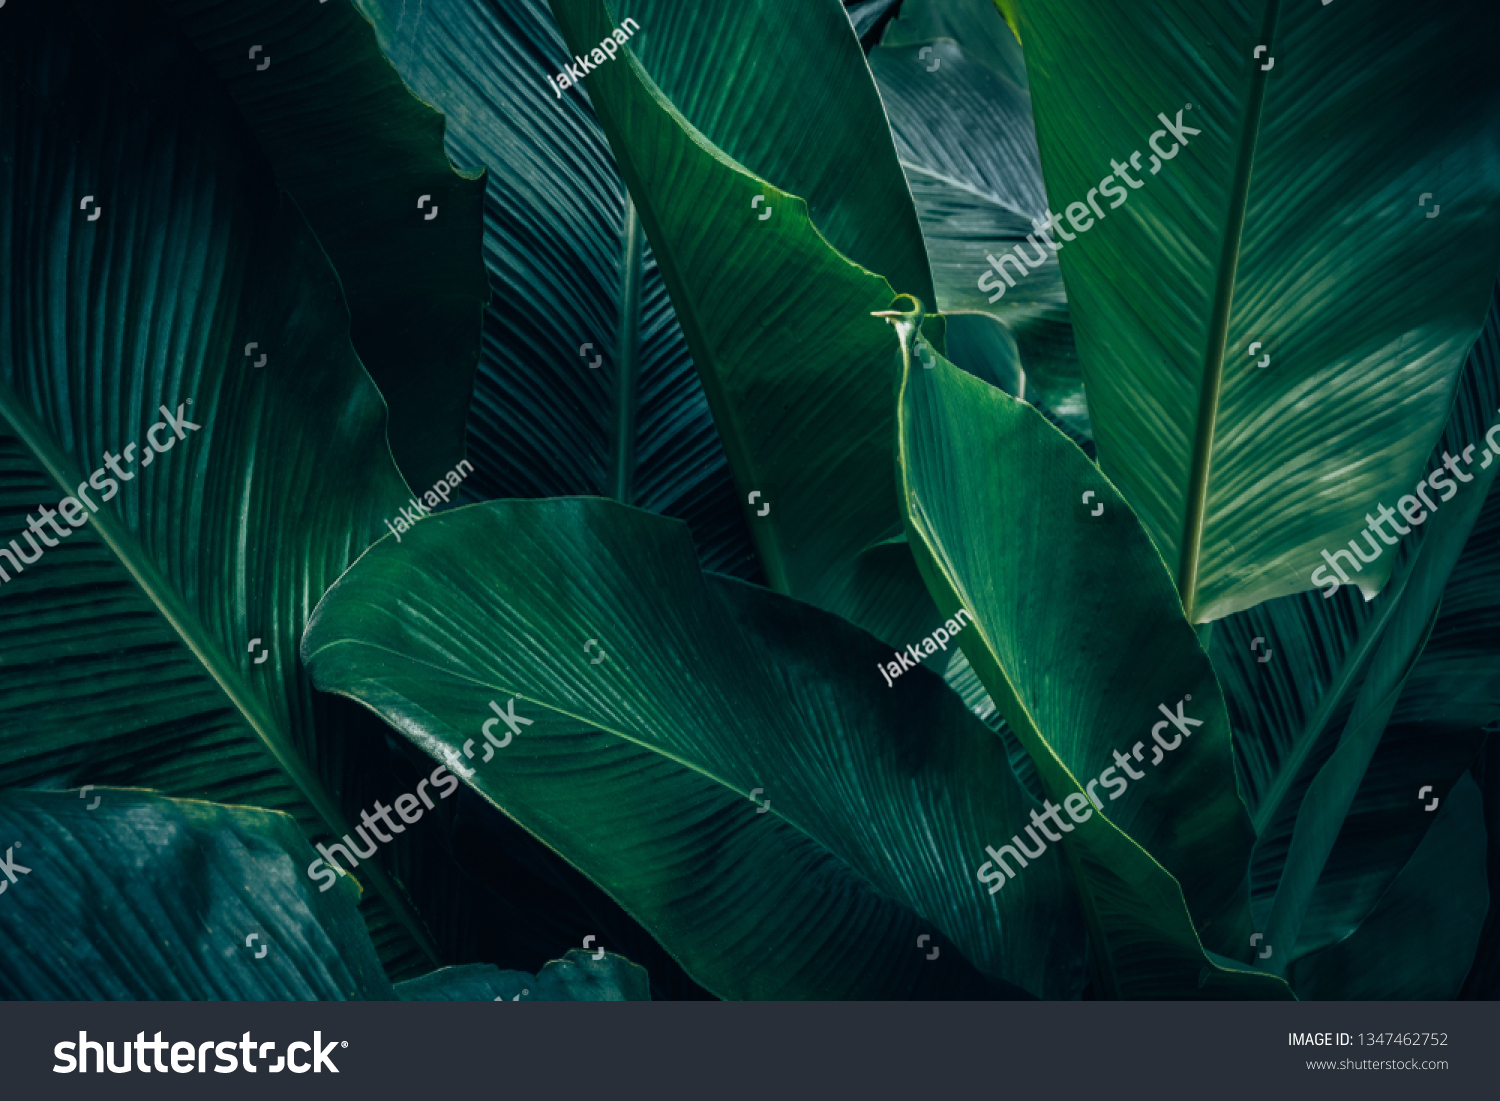 Large foliage of tropical leaf with dark green texture, abstract nature background. #1347462752